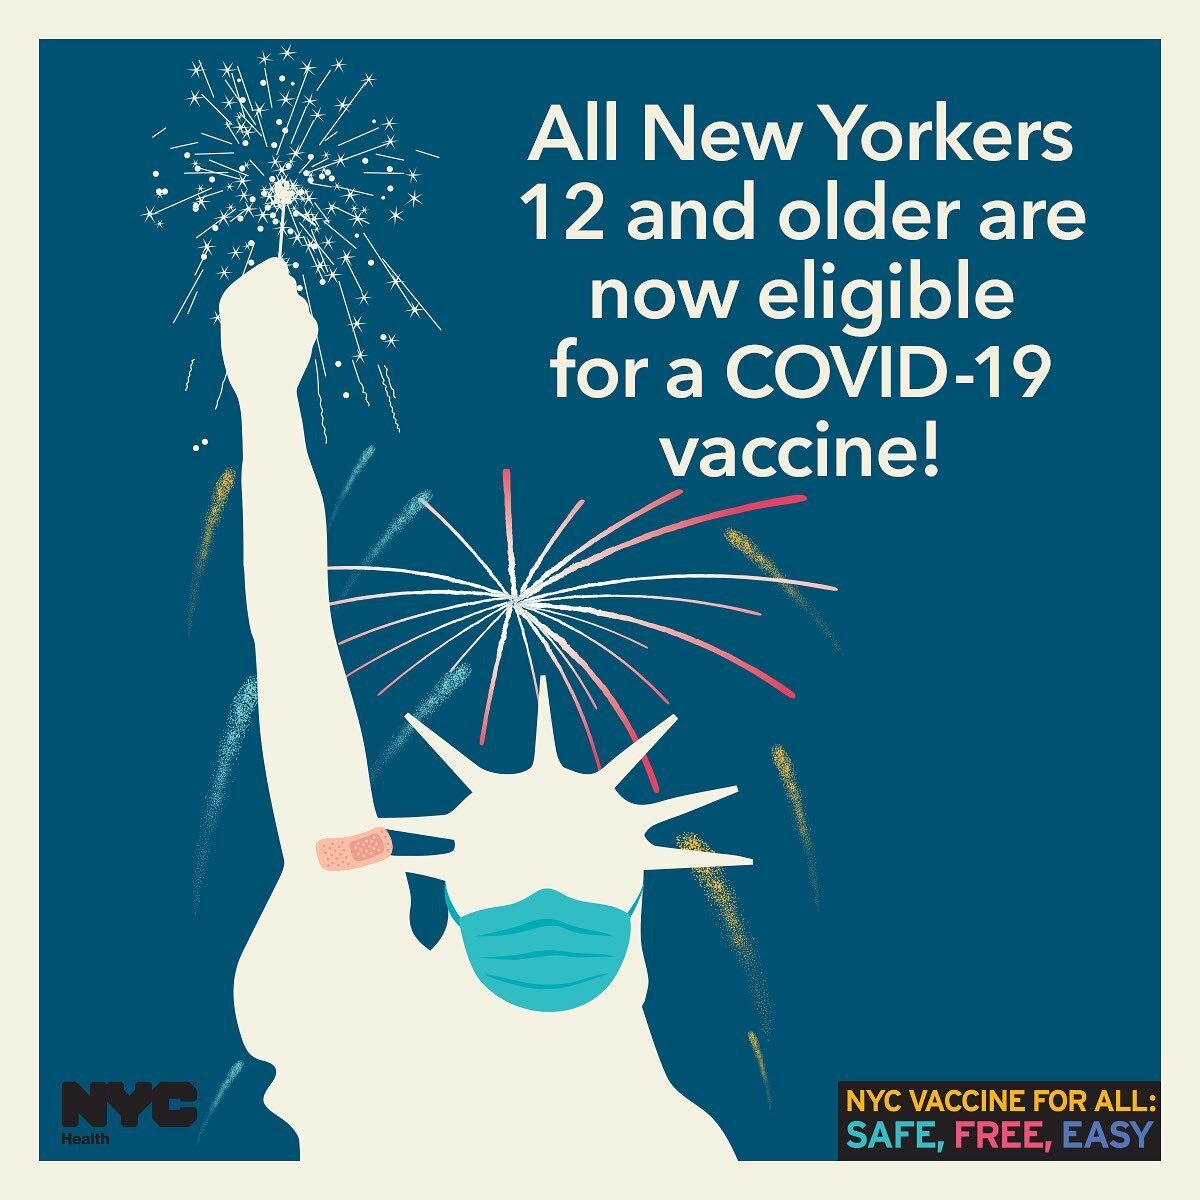 New Yorkers 12-15: it&rsquo;s your turn to get vaccinated! The Pfizer vaccine is now available to you. Find a location at nyc.gov/vaccinefinder 
#nycvaccineforall #covidvacccine #covid_19 #teens